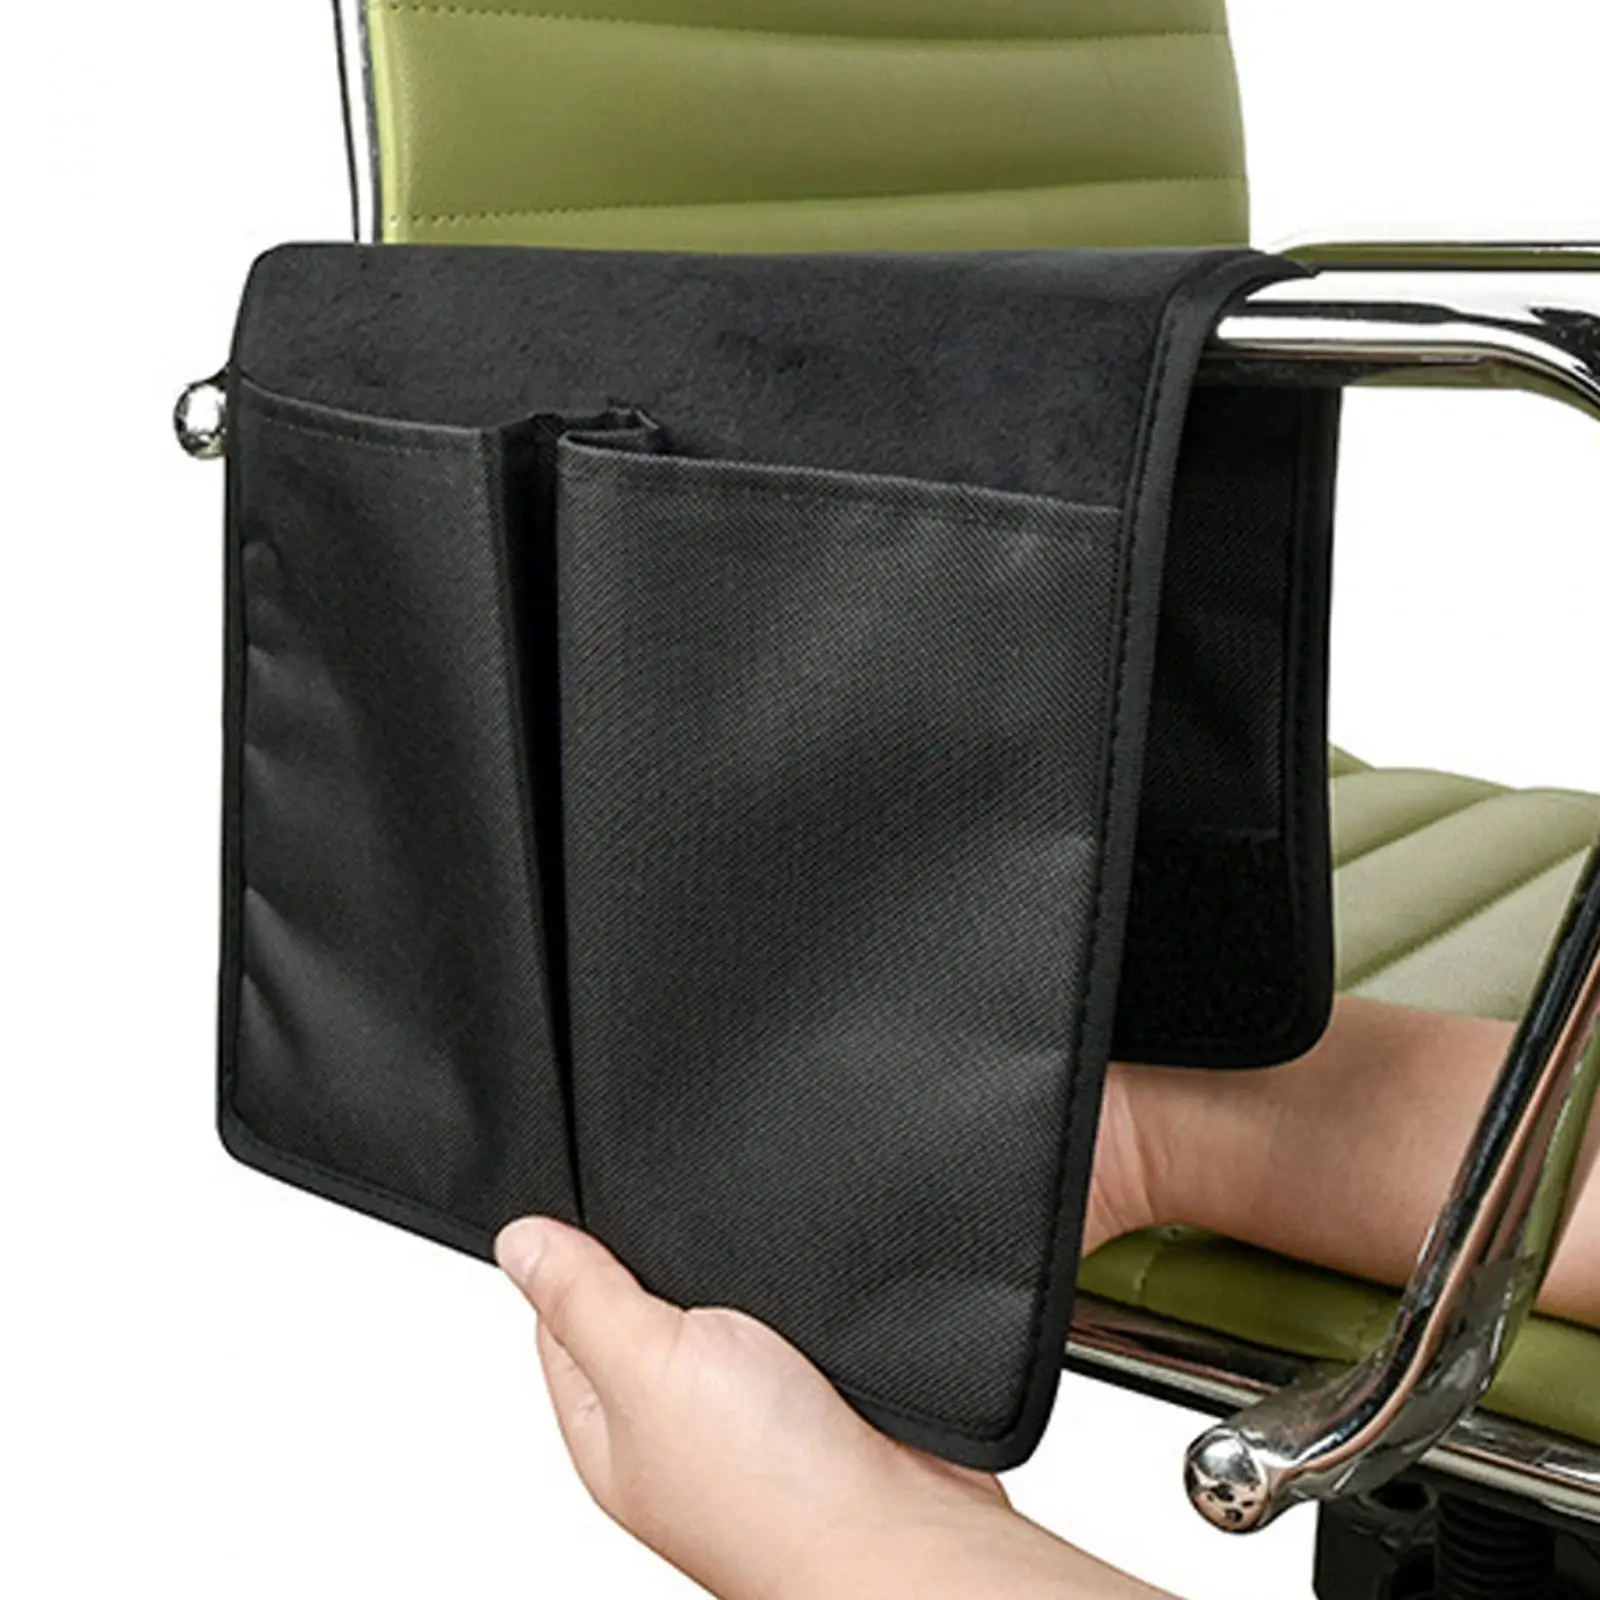 Wheelchair Armrest Pouch Cup Holder Phone Holder Bag Accessories Pouch Chair Side Bag for Pen Remotes Glasses Phone Black